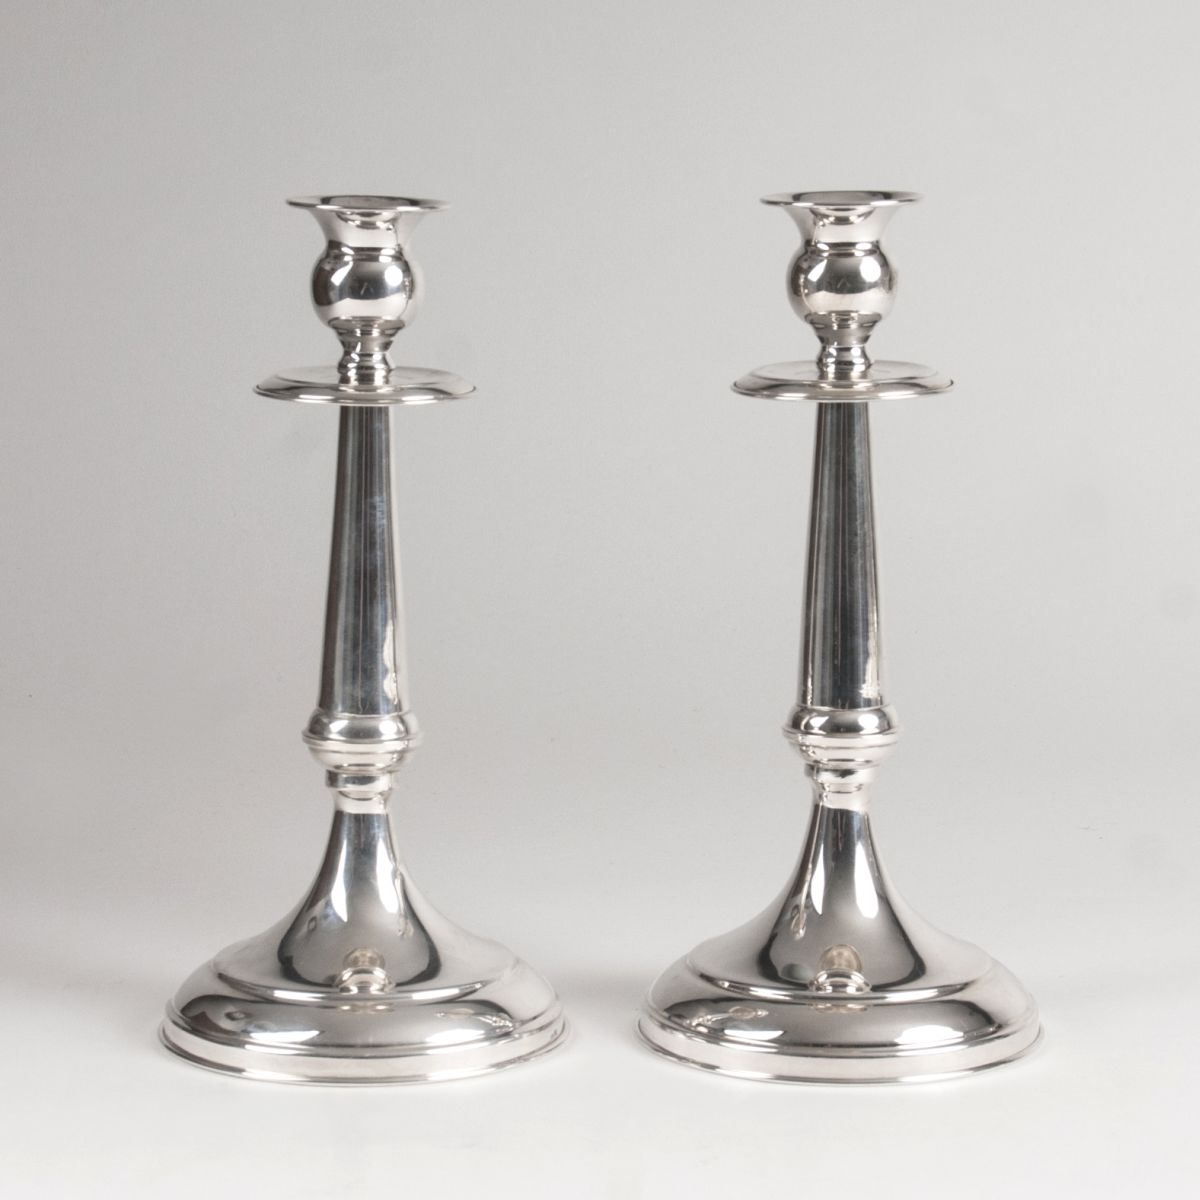 A pair of classic candelabra